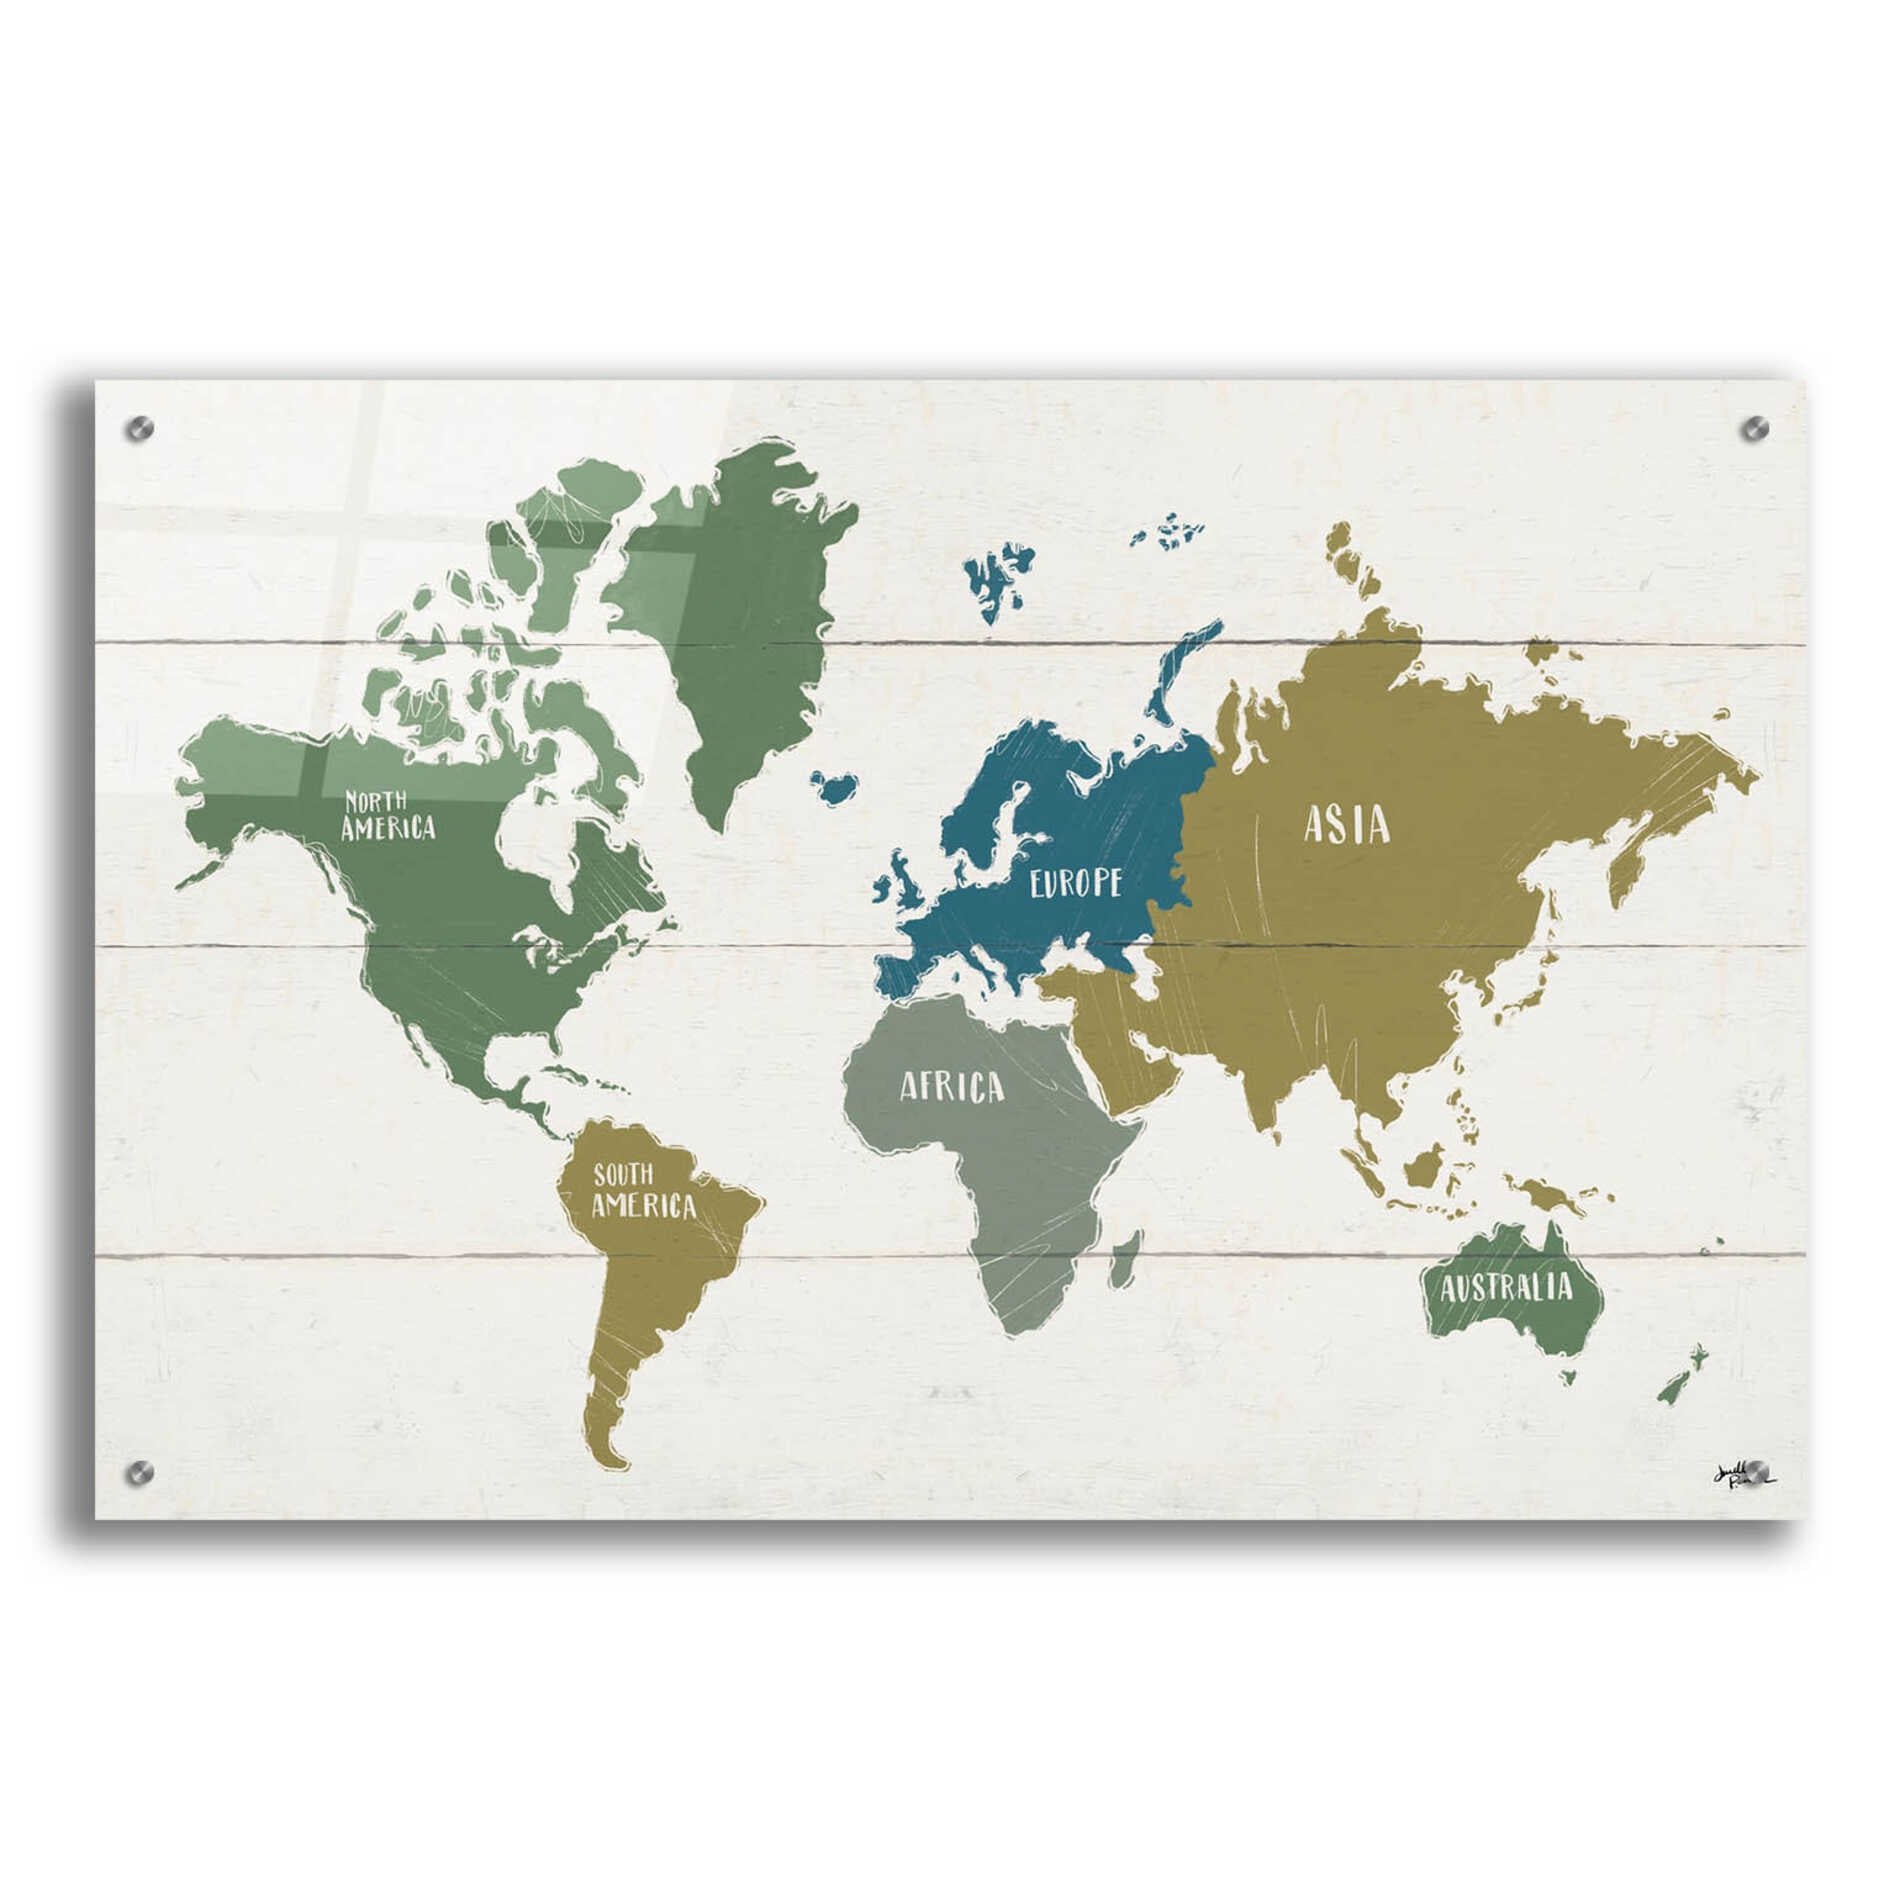 Epic Art 'Peace and Lodge World Map' by Janelle Penner, Acrylic Glass Wall Art,36x24